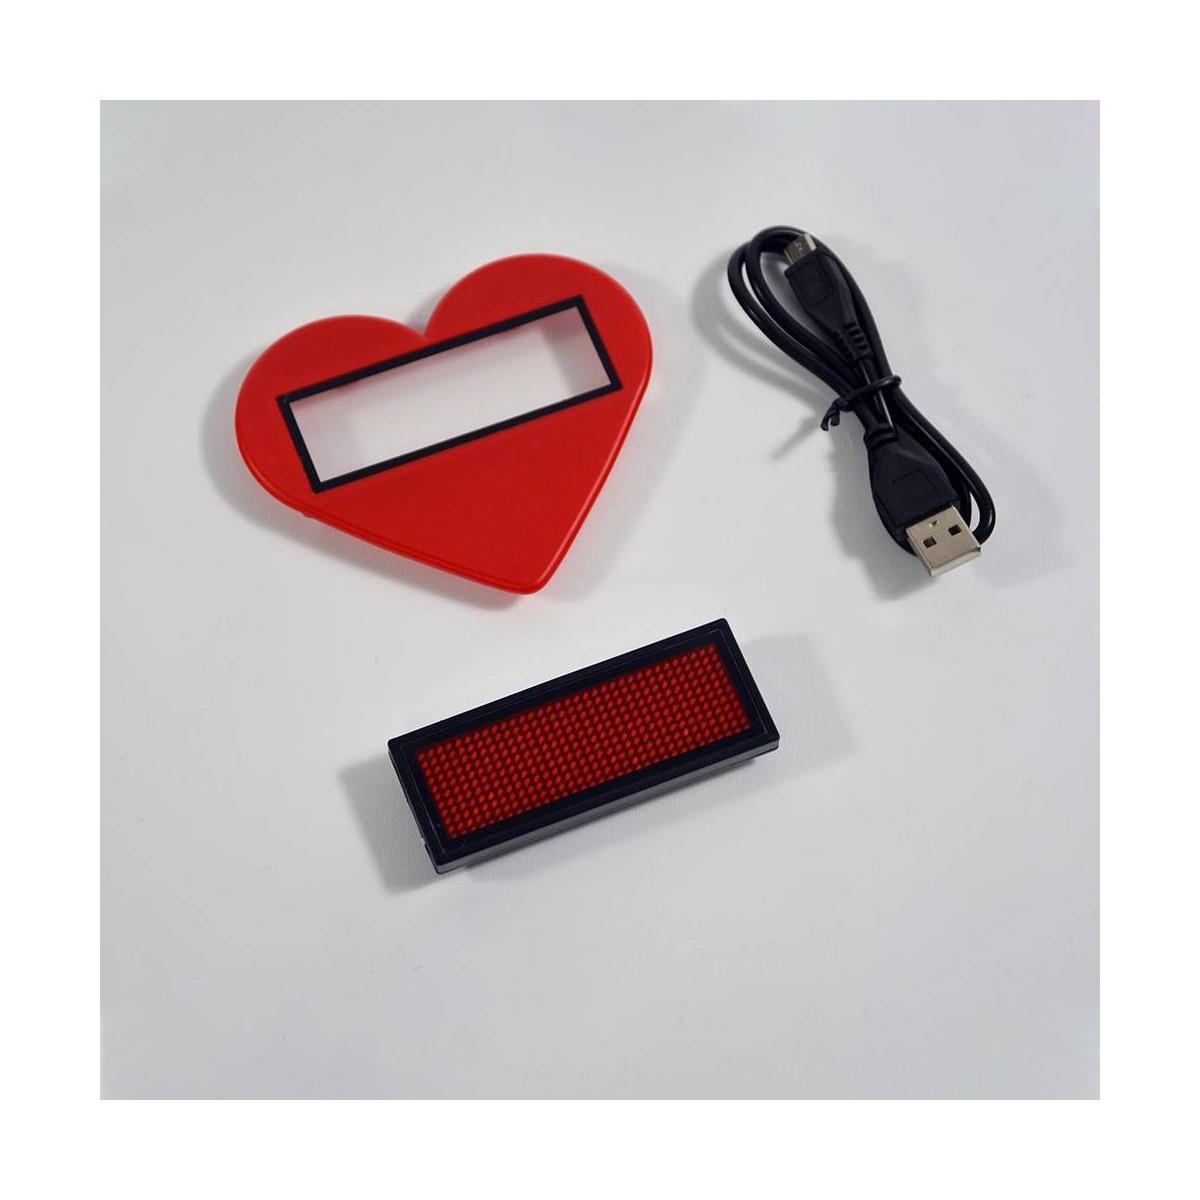 DISTINCTIVE PORTABLE PROGRAMMABLE LED SIGN WITH HEART SHAPE